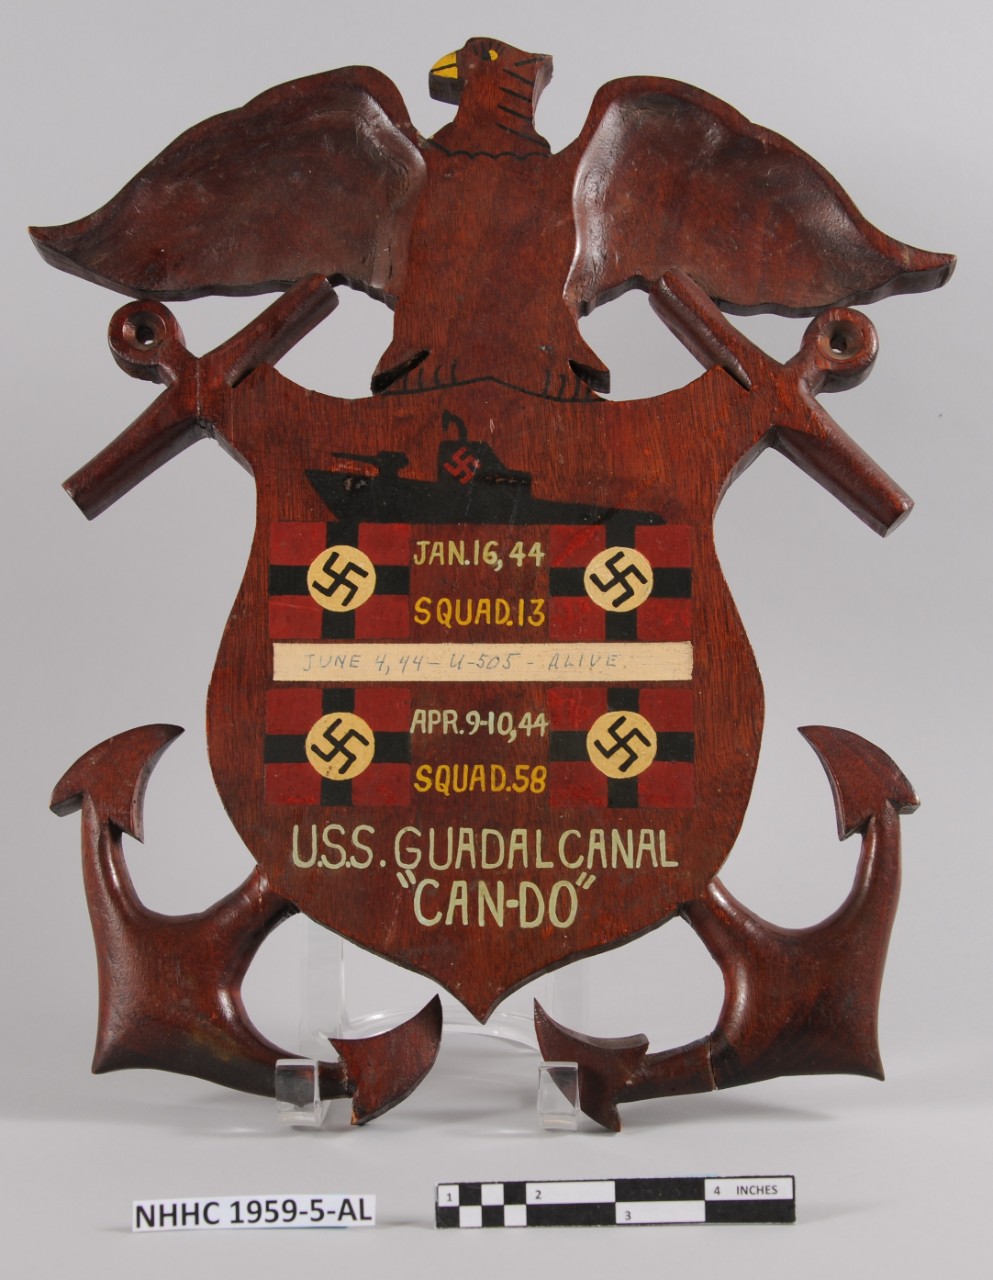 One US Navy Ship Submarine Victory Commemorative Plaque from the USS Guadalcanal (CVU-60/ CVE-60). Dark brown wood plaque consists of a shield in the center and an eagle with spread wings perched on top. Behind the shield are two crossed anchors....